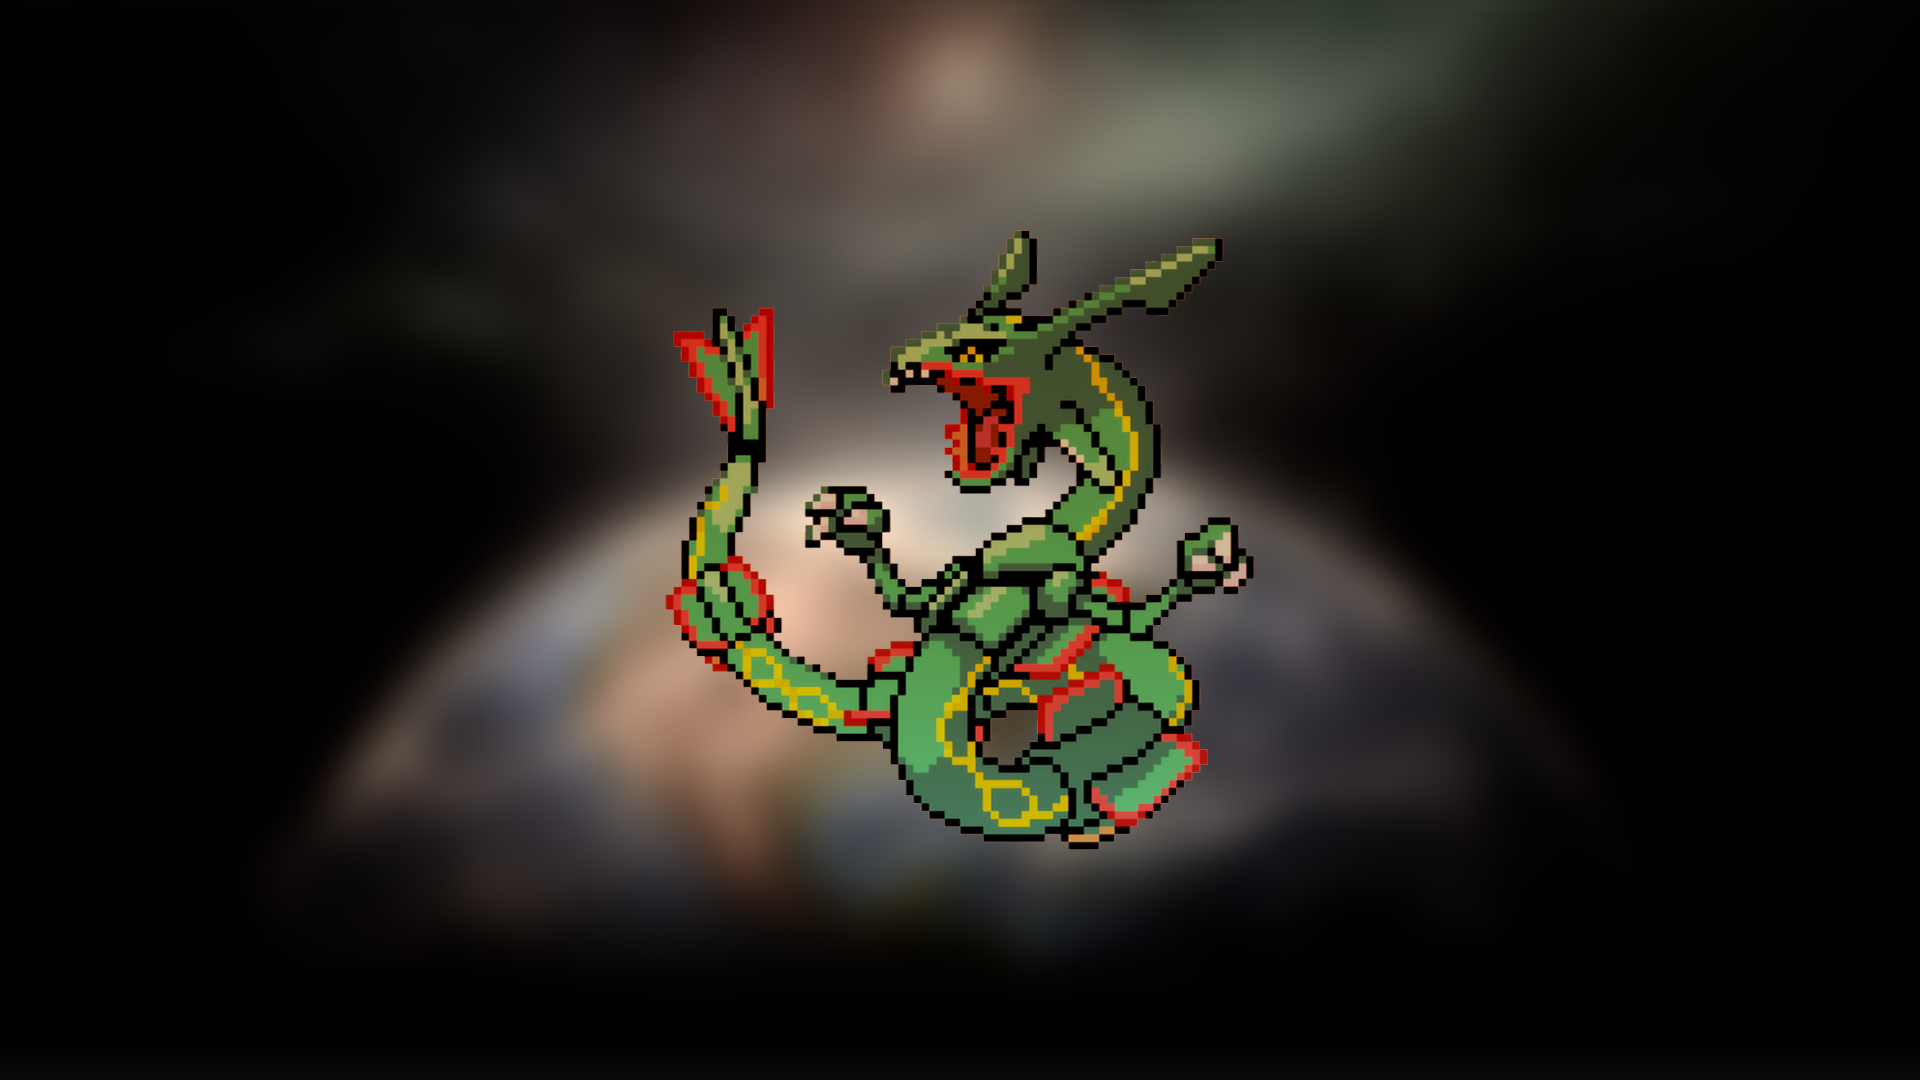 Shiny Mega Rayquaza Wallpaper Rayquaza Groudon Kyogre  Pokemon Fusion  Groudon And Kyogre HD Png Download  Transparent Png Image  PNGitem